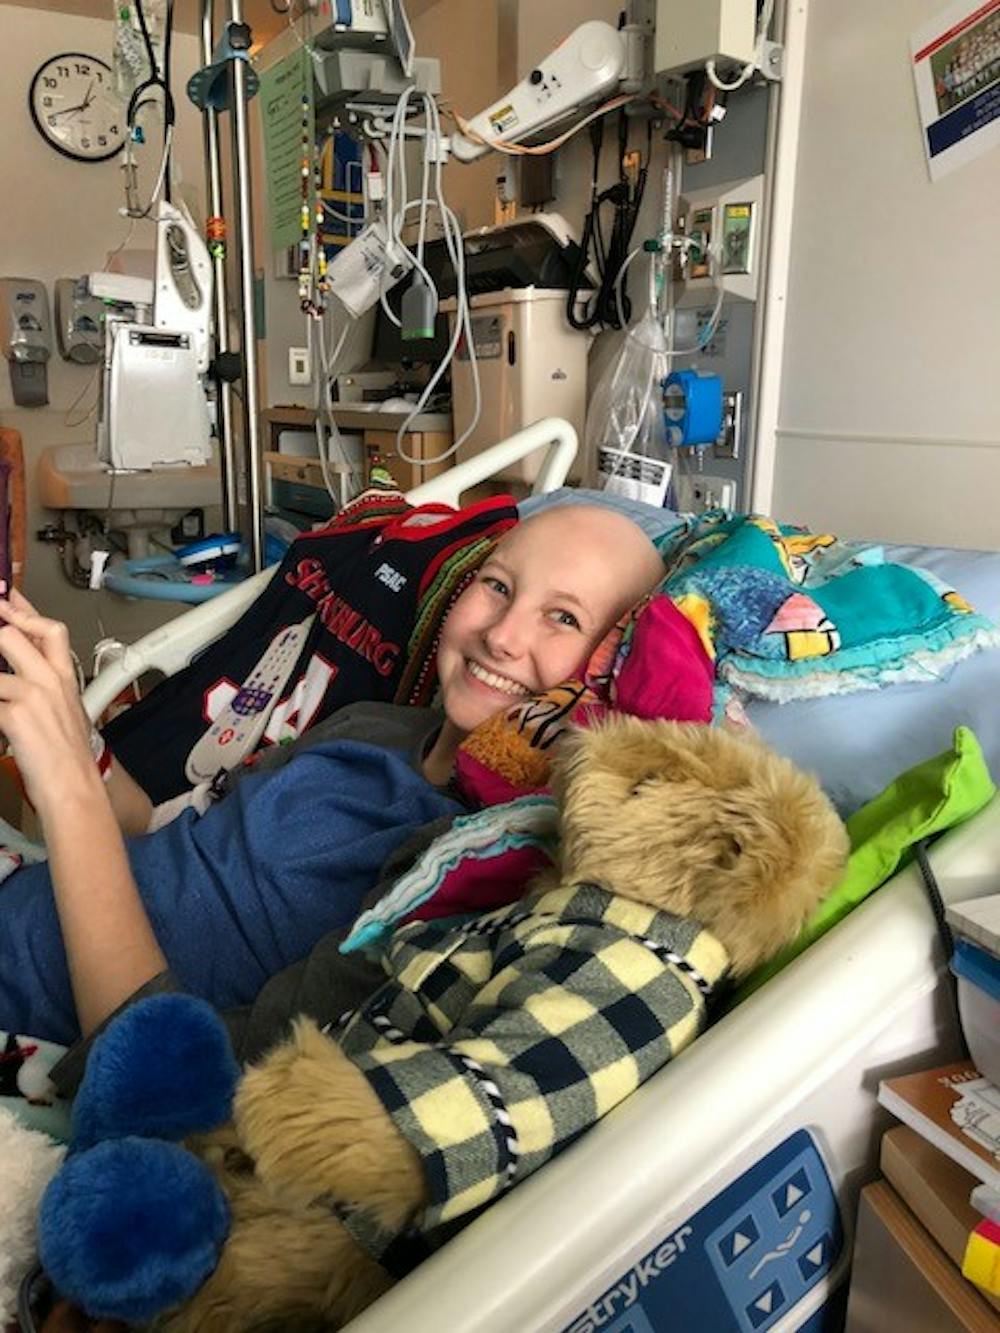 Fighting with all her heart: Megan Hart continues to battle leukemia